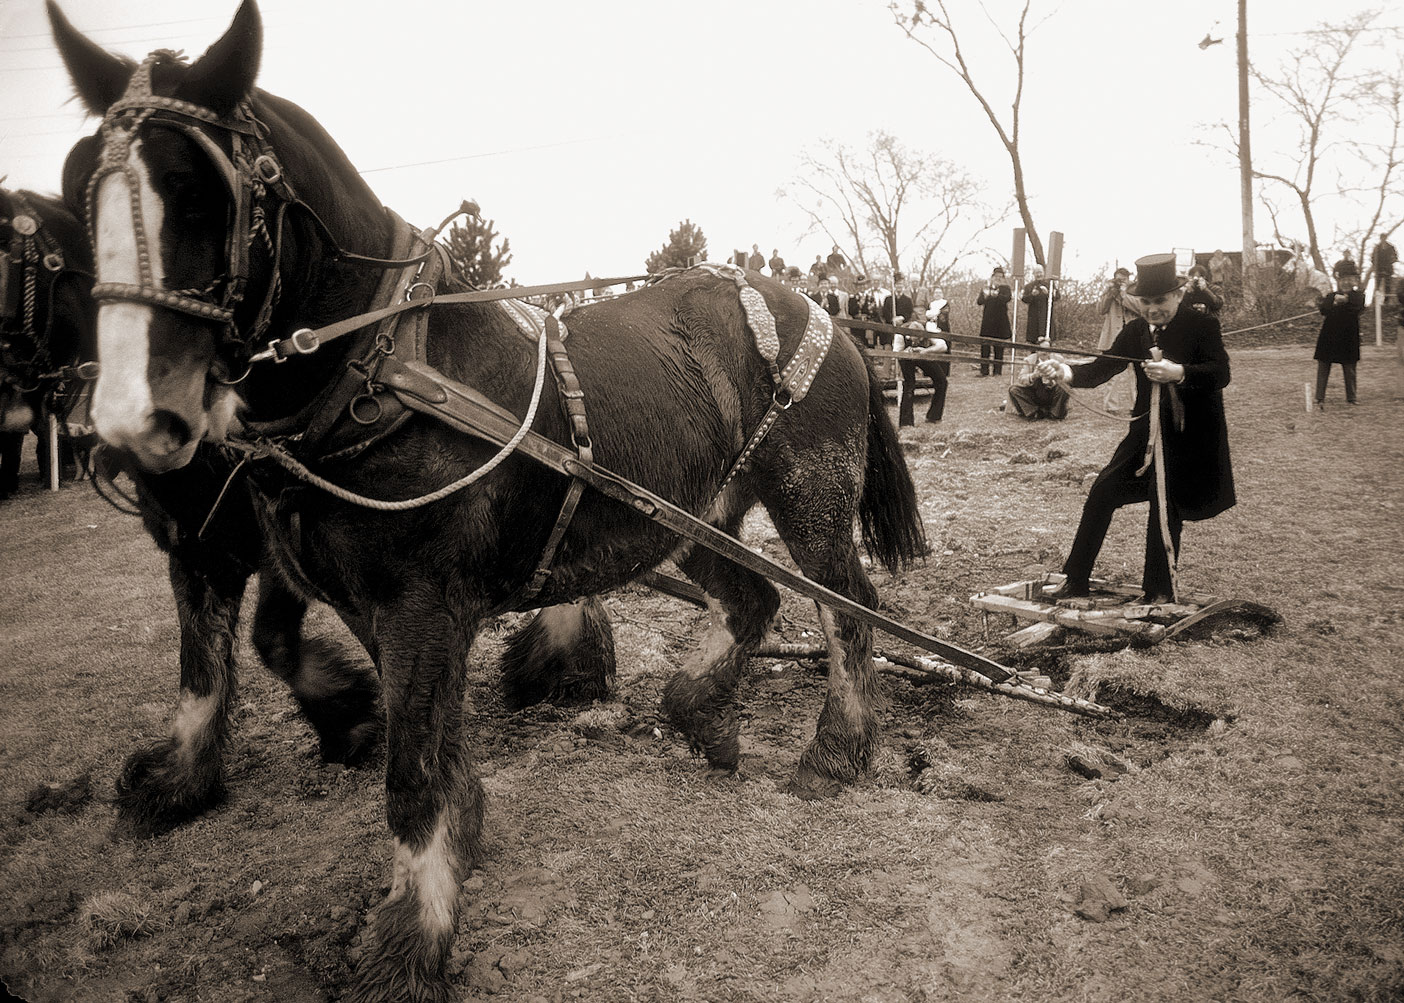 President Dallin H. Oaks hops on a horse-drawn plow for the groundbreaking ceremony of the Centennial Carillon Tower in 1975.